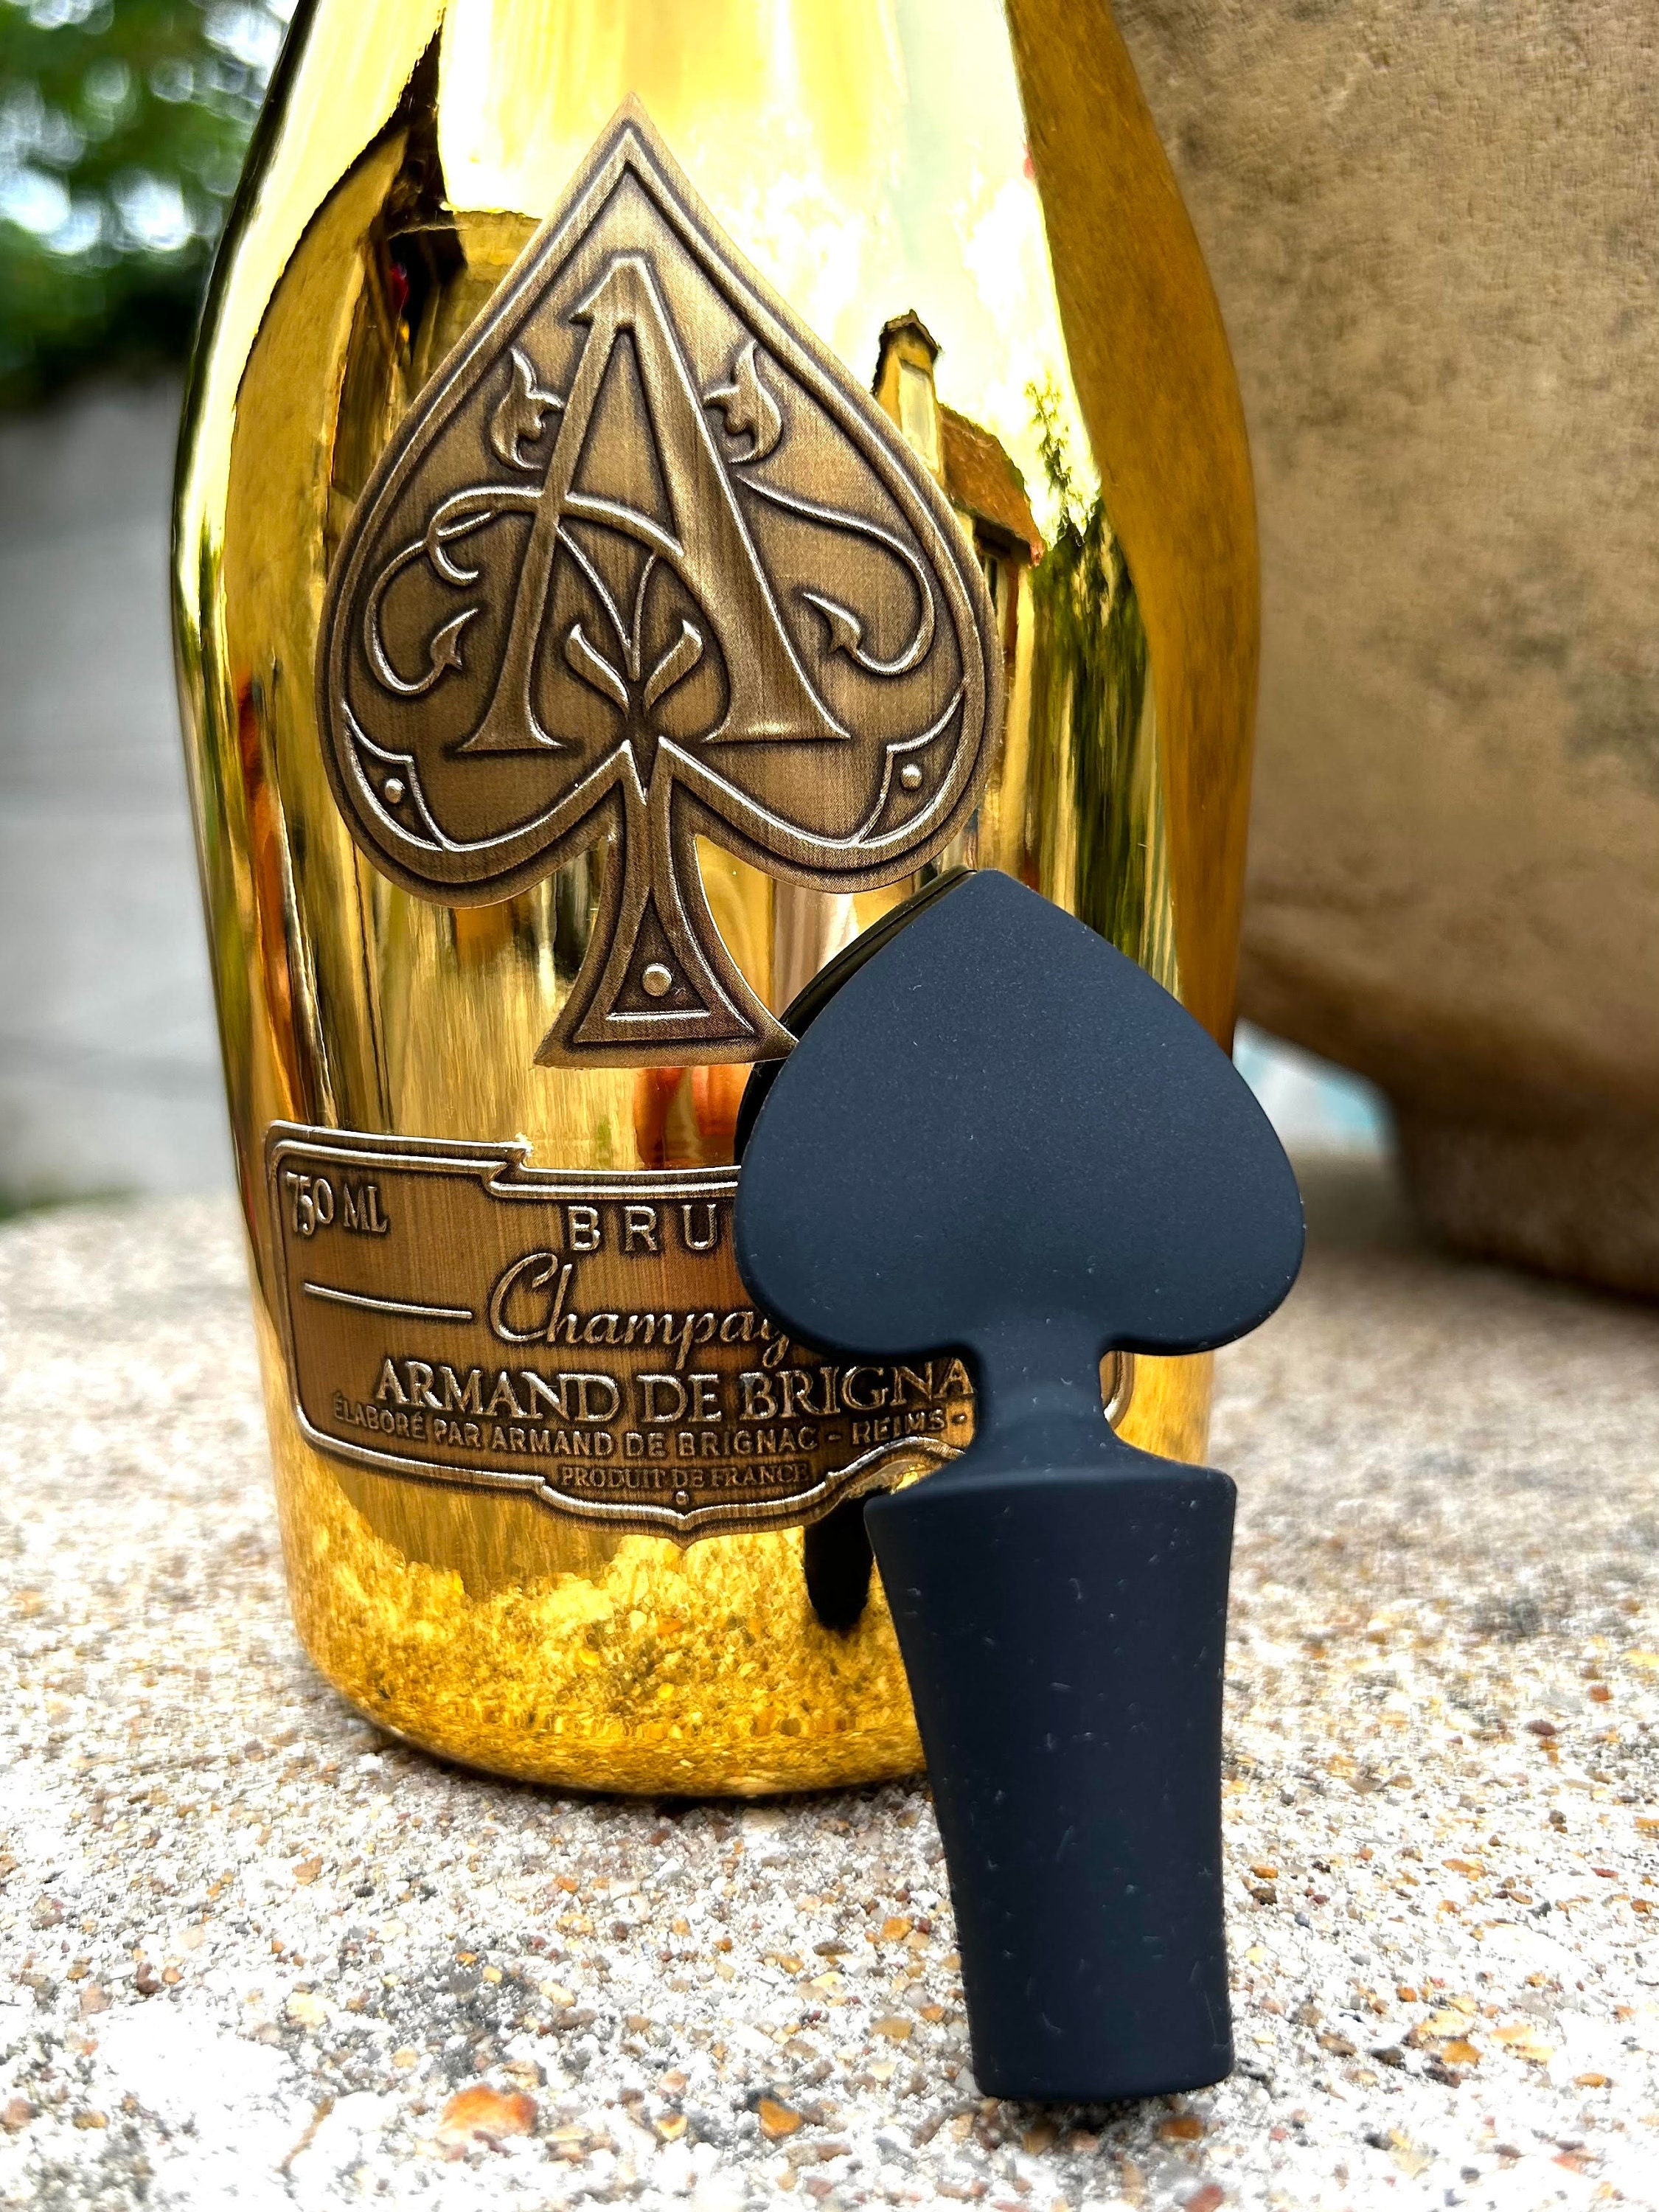 Ace of Spades Champagne 